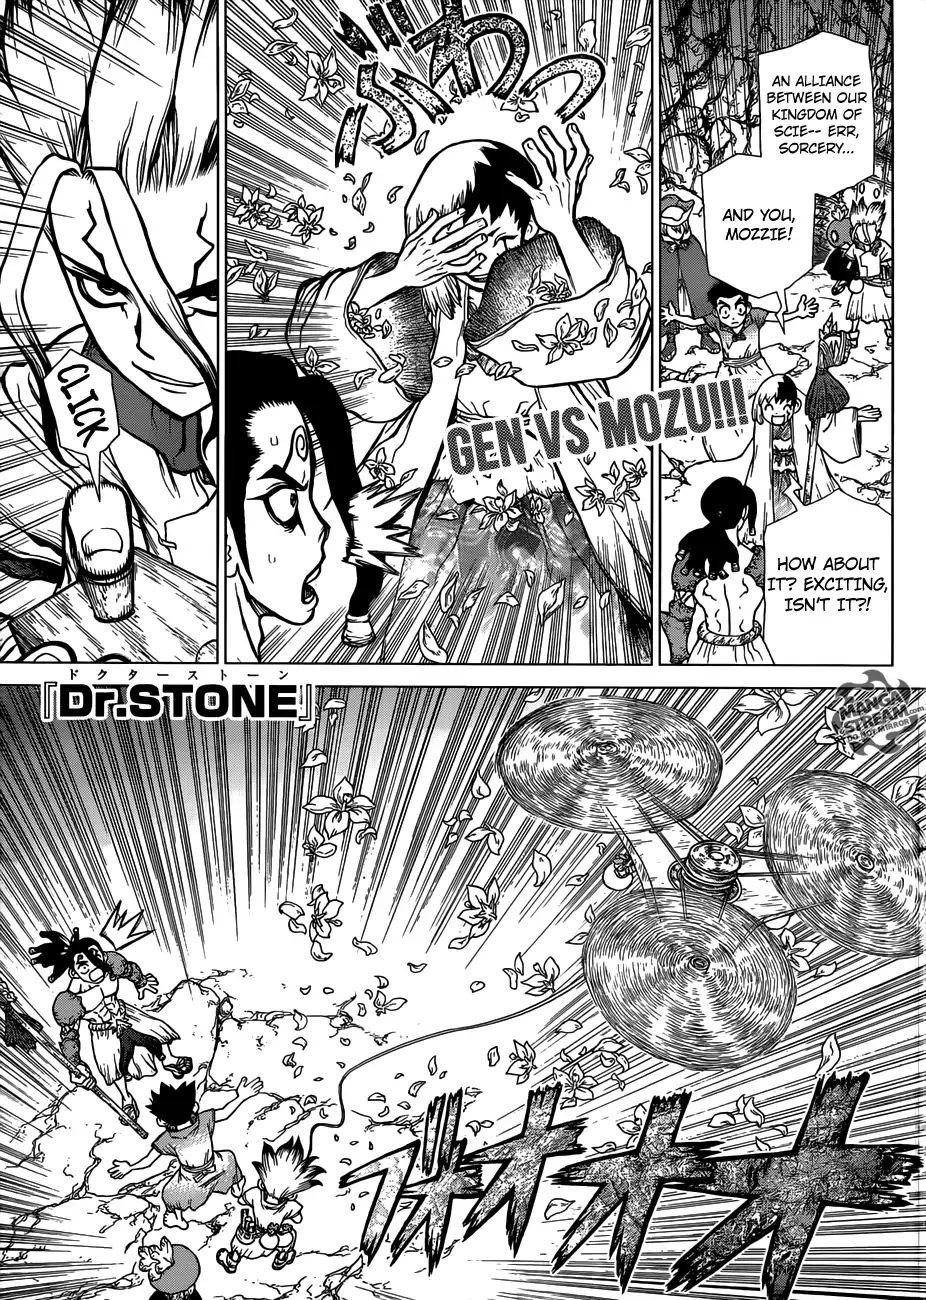 Read Dr Stone Chapter 123 The Battle Of Wits Deal Game On Mangakakalot